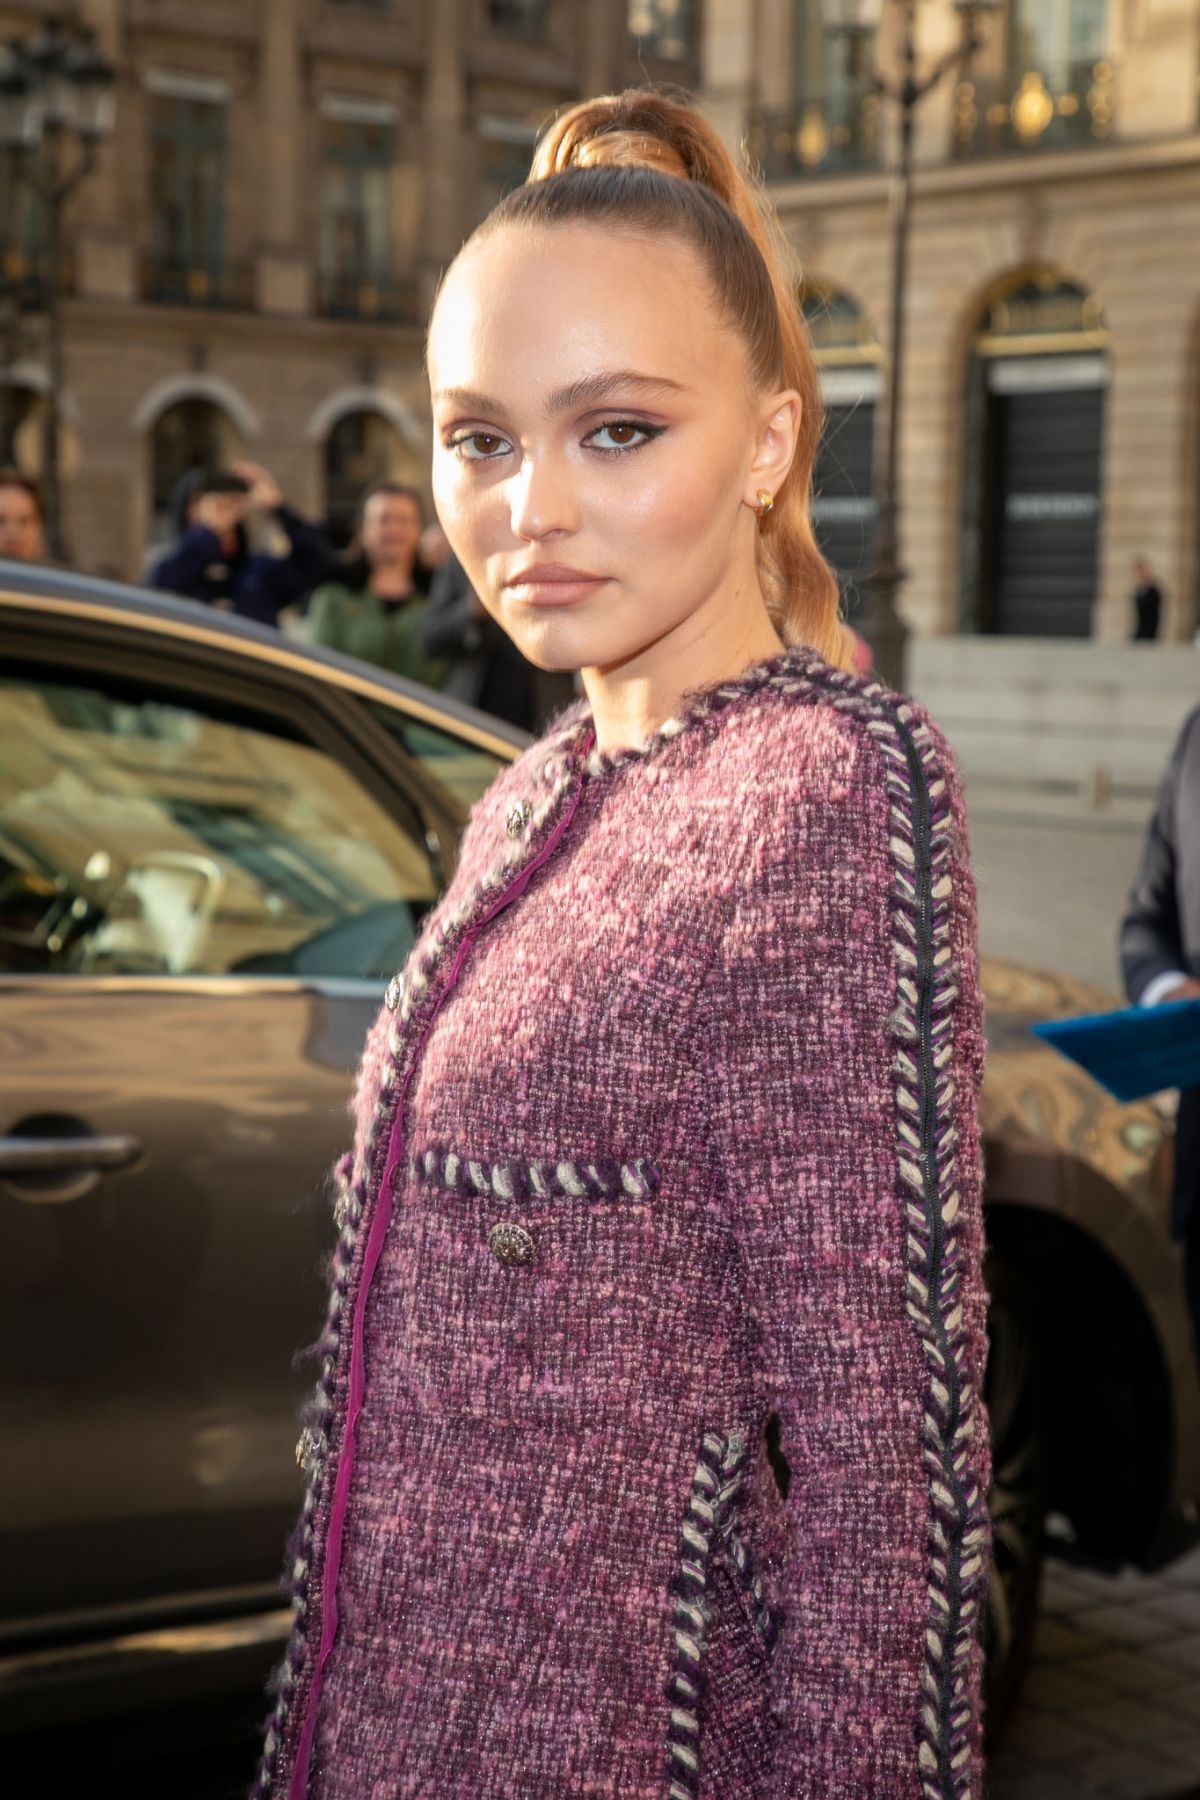 LILY-ROSE DEPP at Chanel J12 Cocktail in Paris 05/02/2019 ...